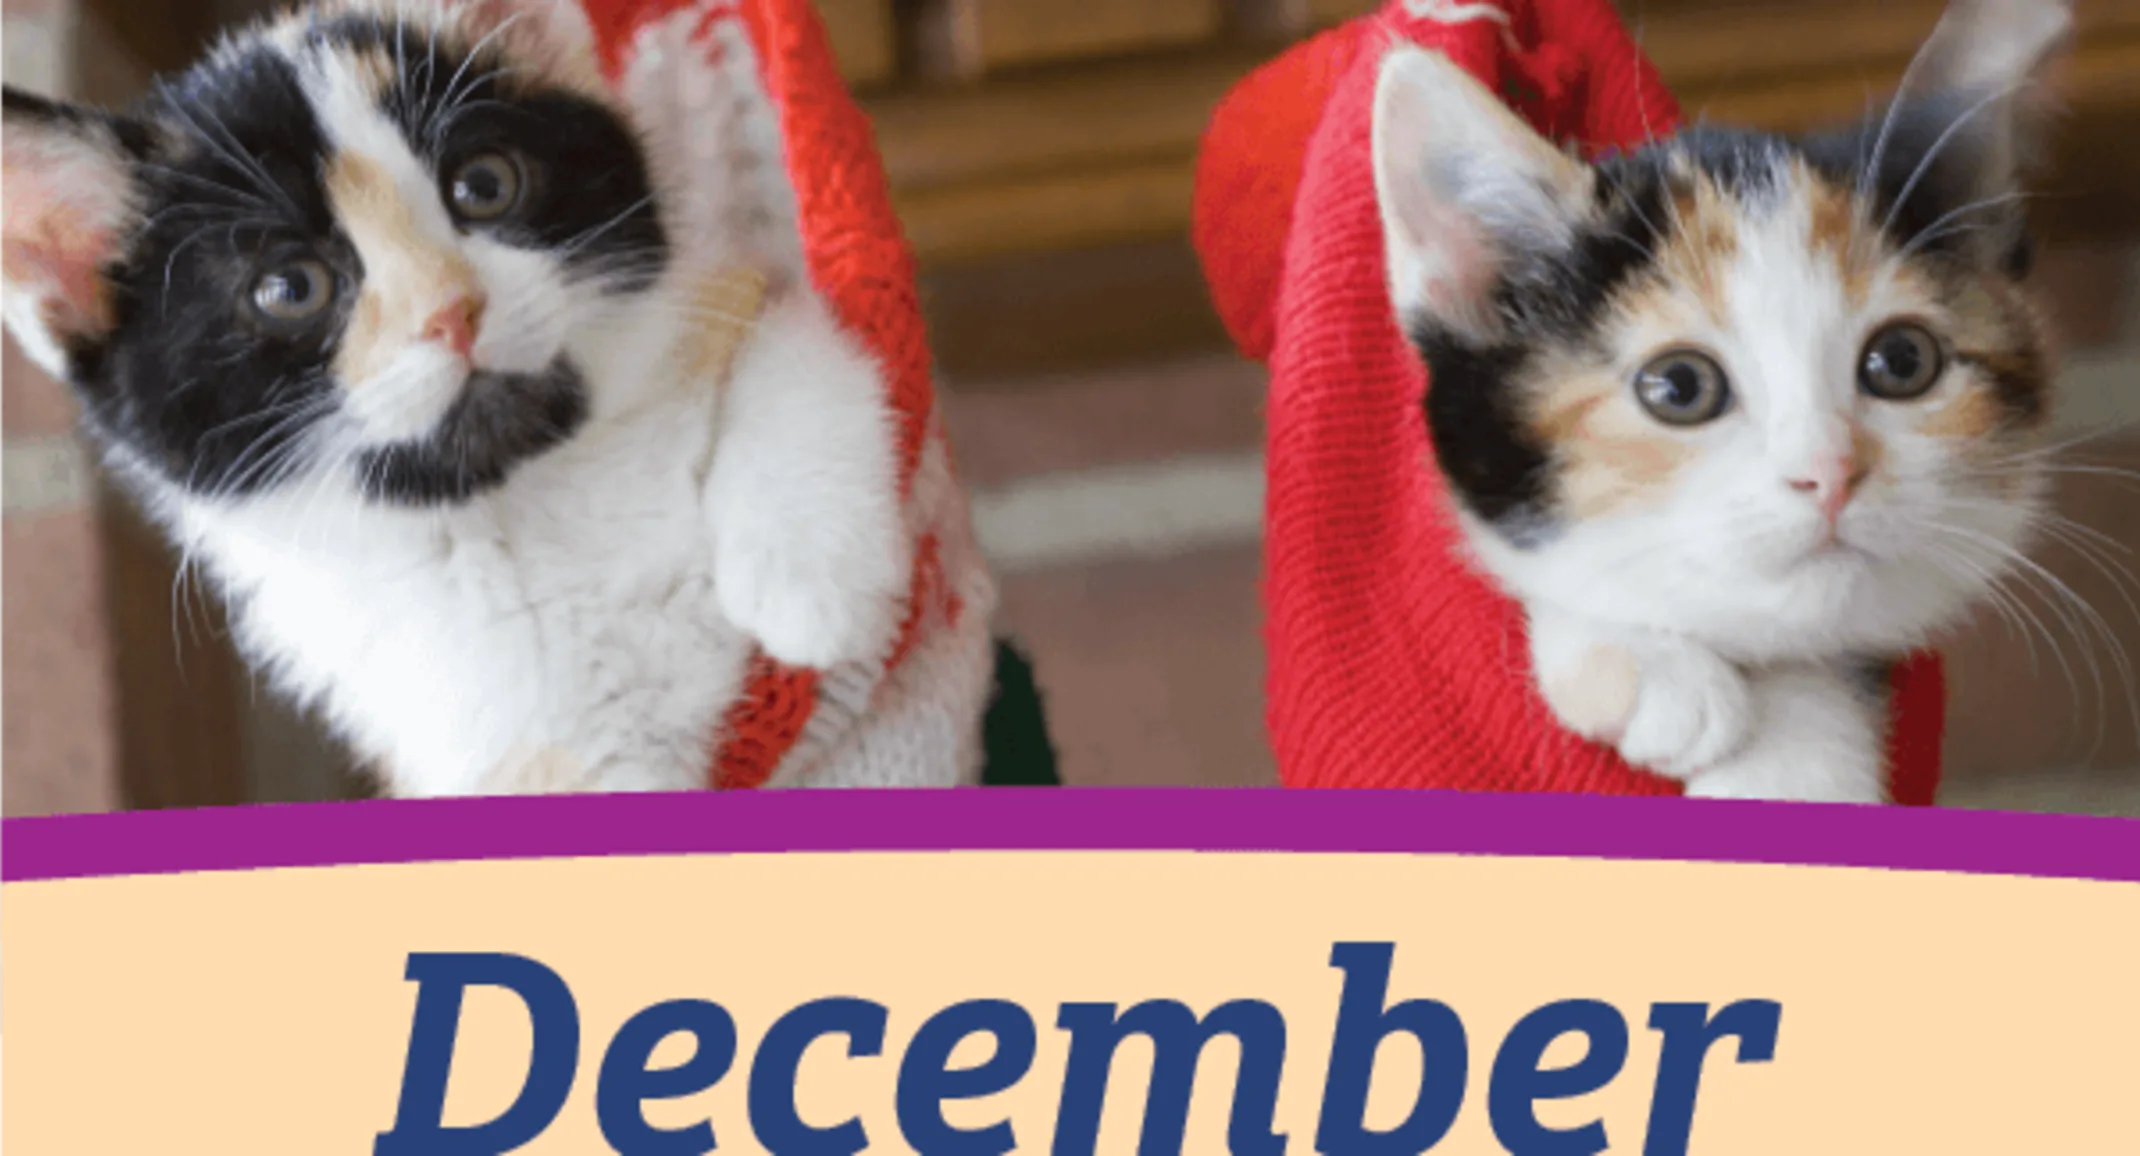 Two adorable kittens are inside two separate Christimas stocking hung up in the air.